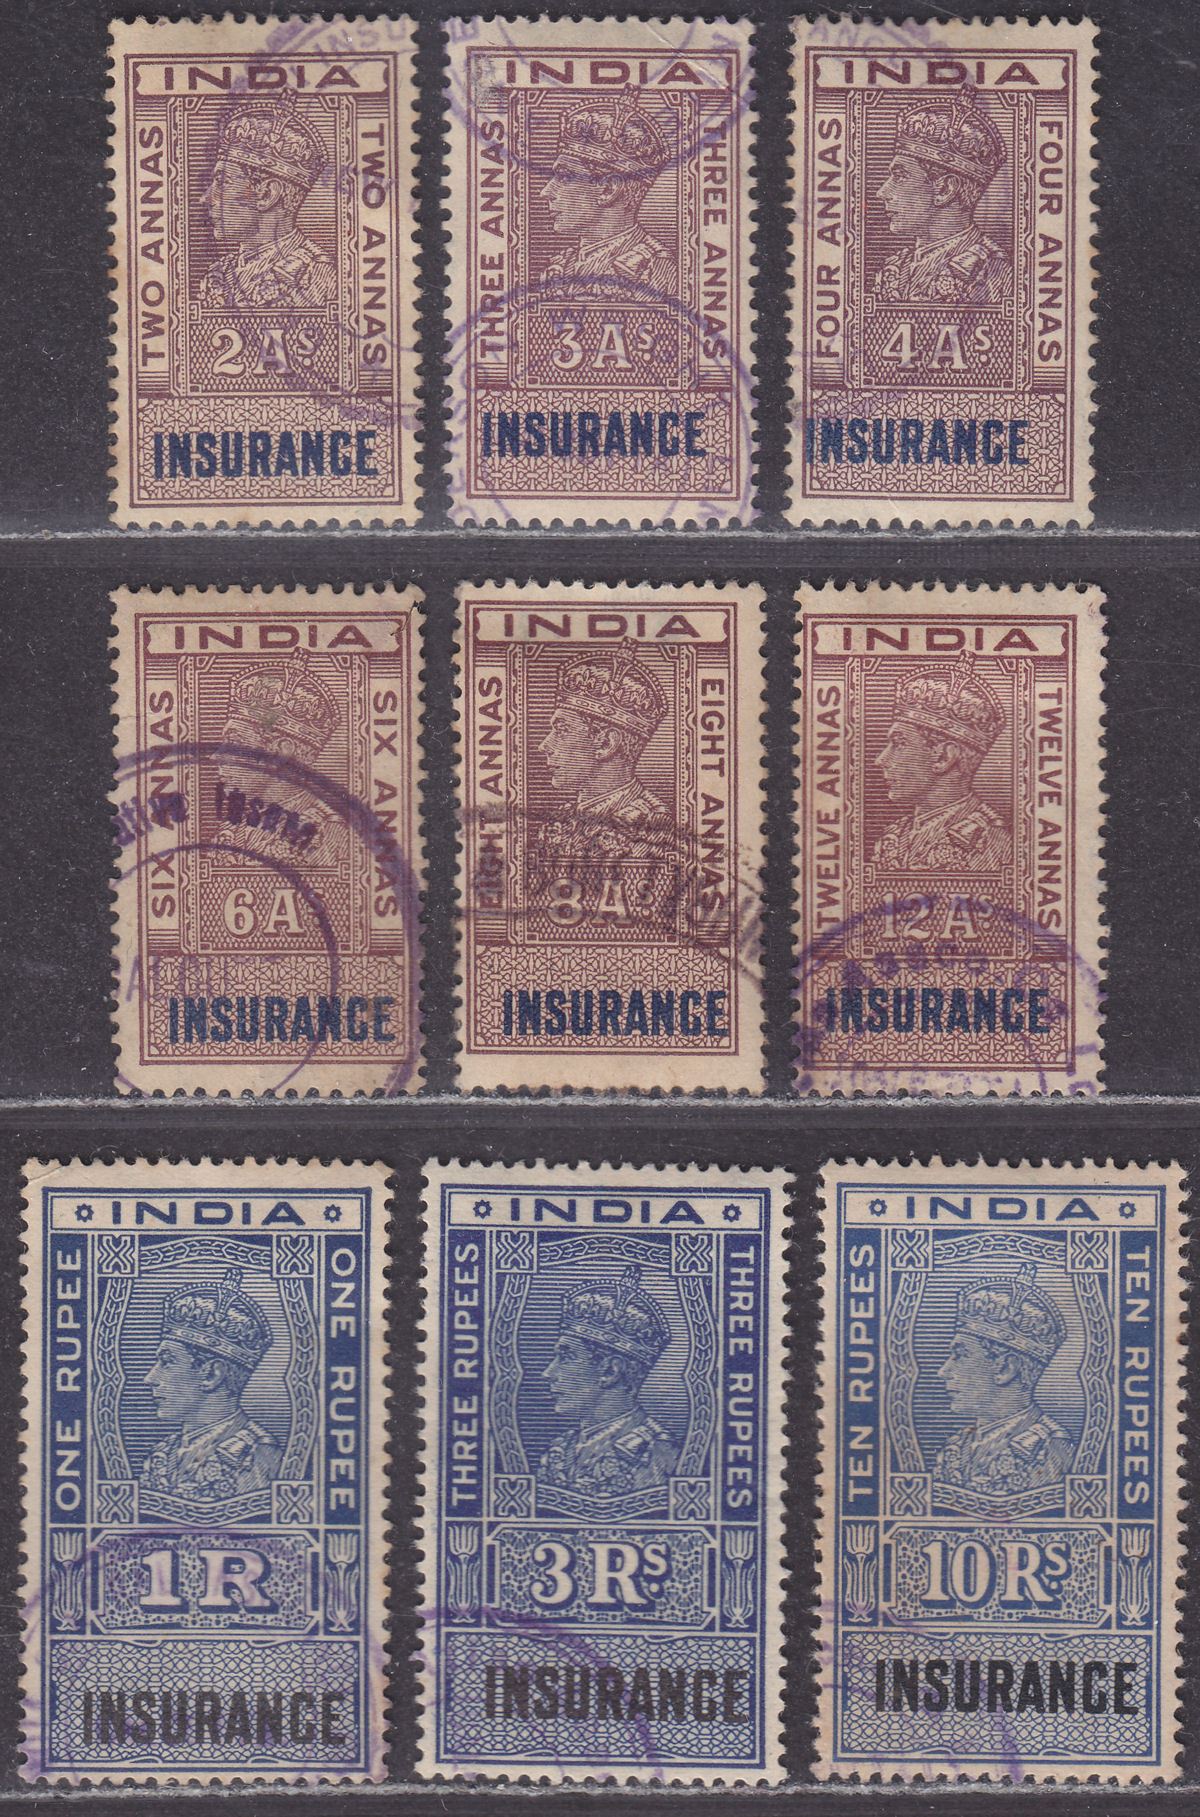 India 1937 KGVI Revenue Insurance Part Set 2a - 10r Used BF46-BF55